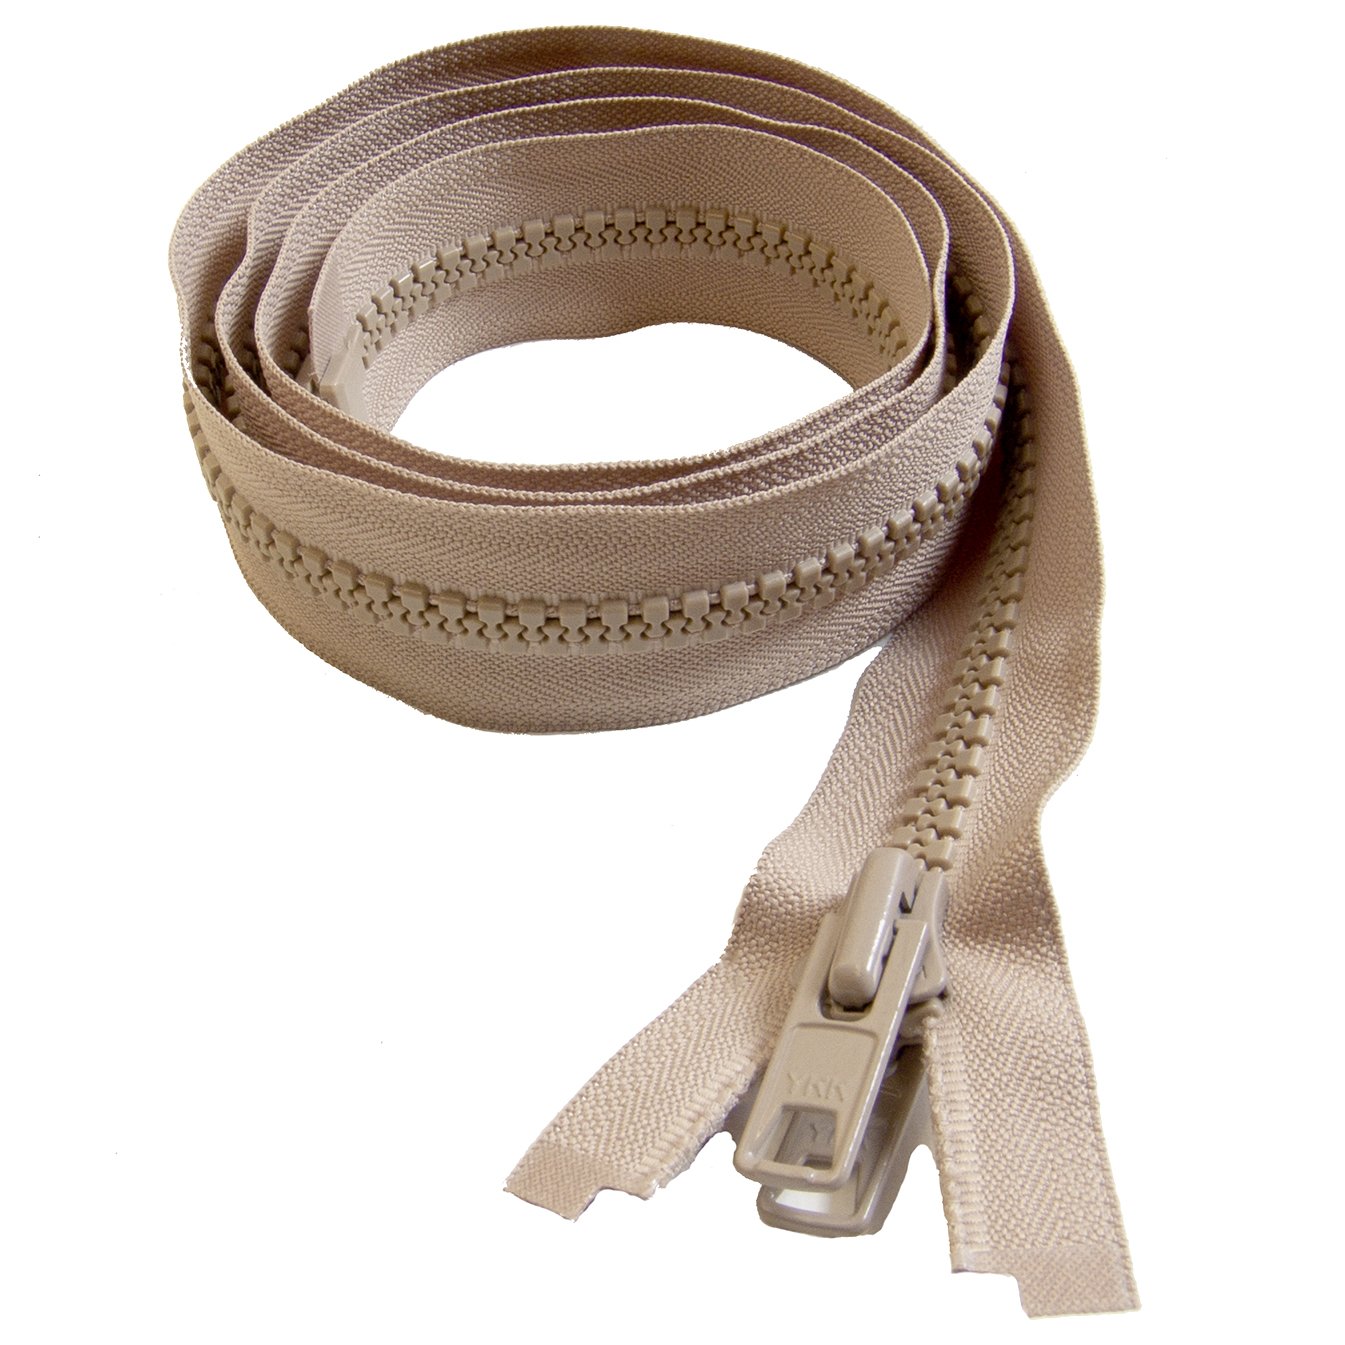 Ulcercare 2-part System, Left-side Zipper With 2 Liners, Beige, 2x-large